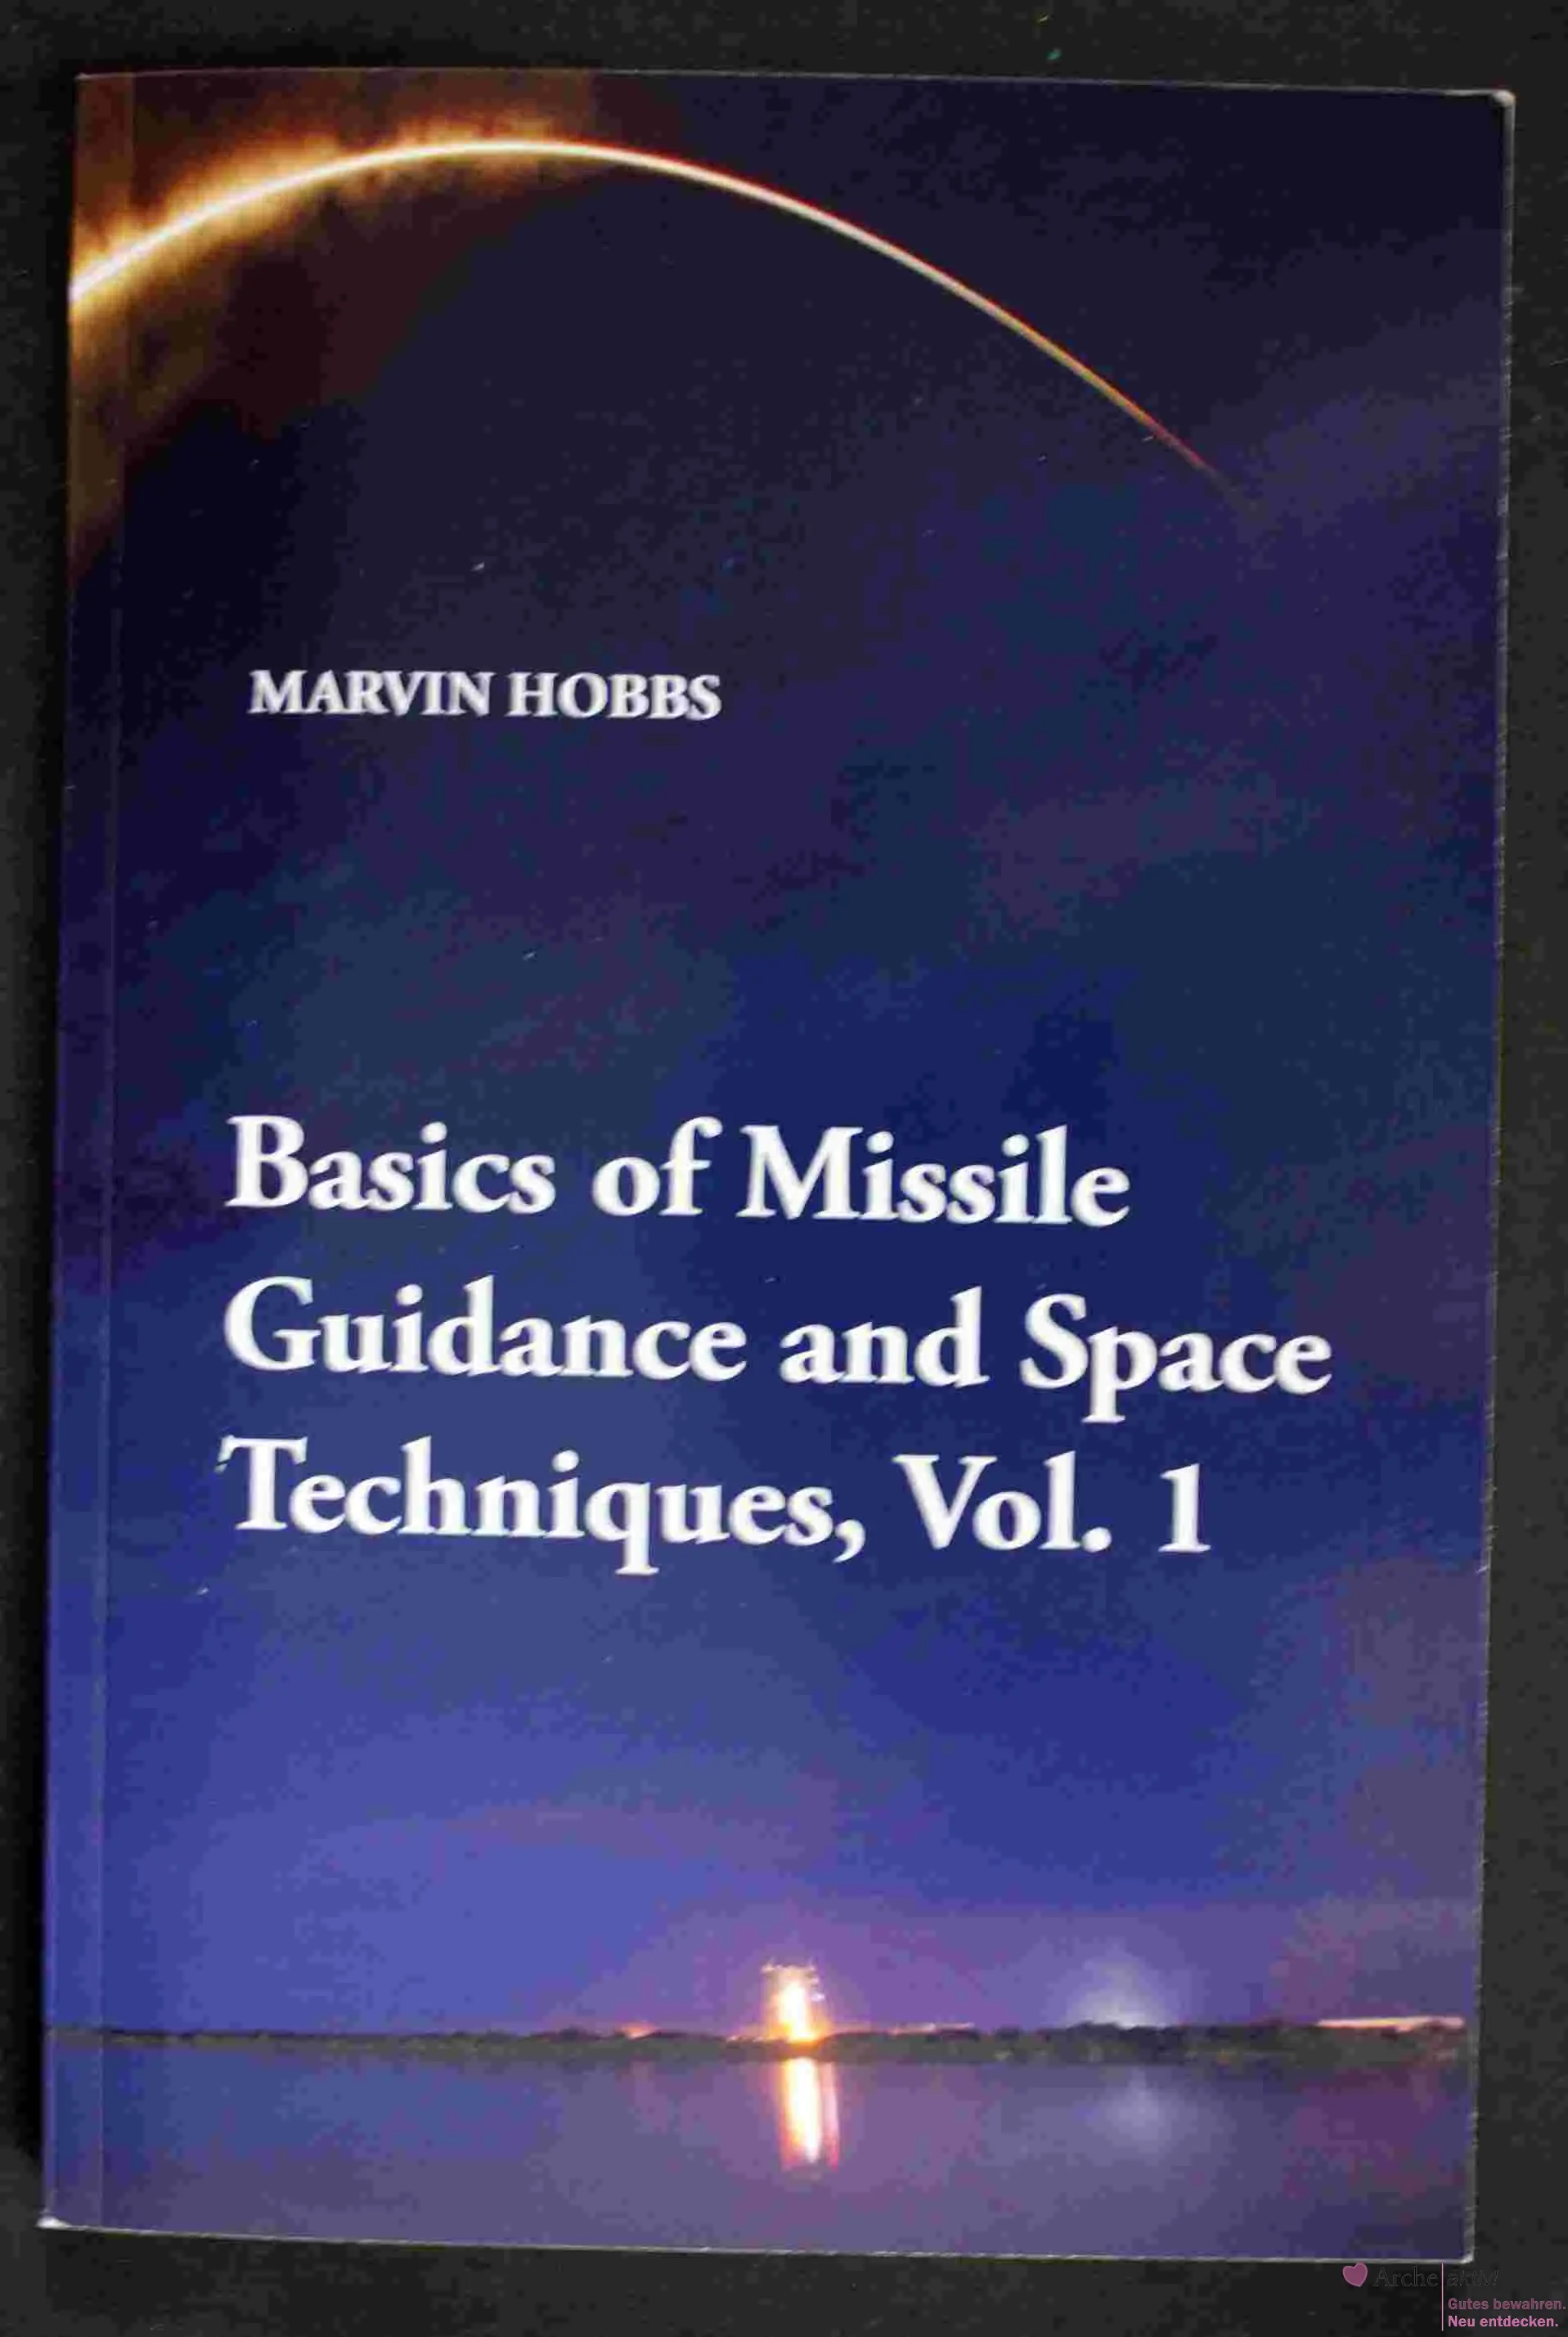 Basics of Missile Guidance and Space Techniques, Vol. 1, gebraucht